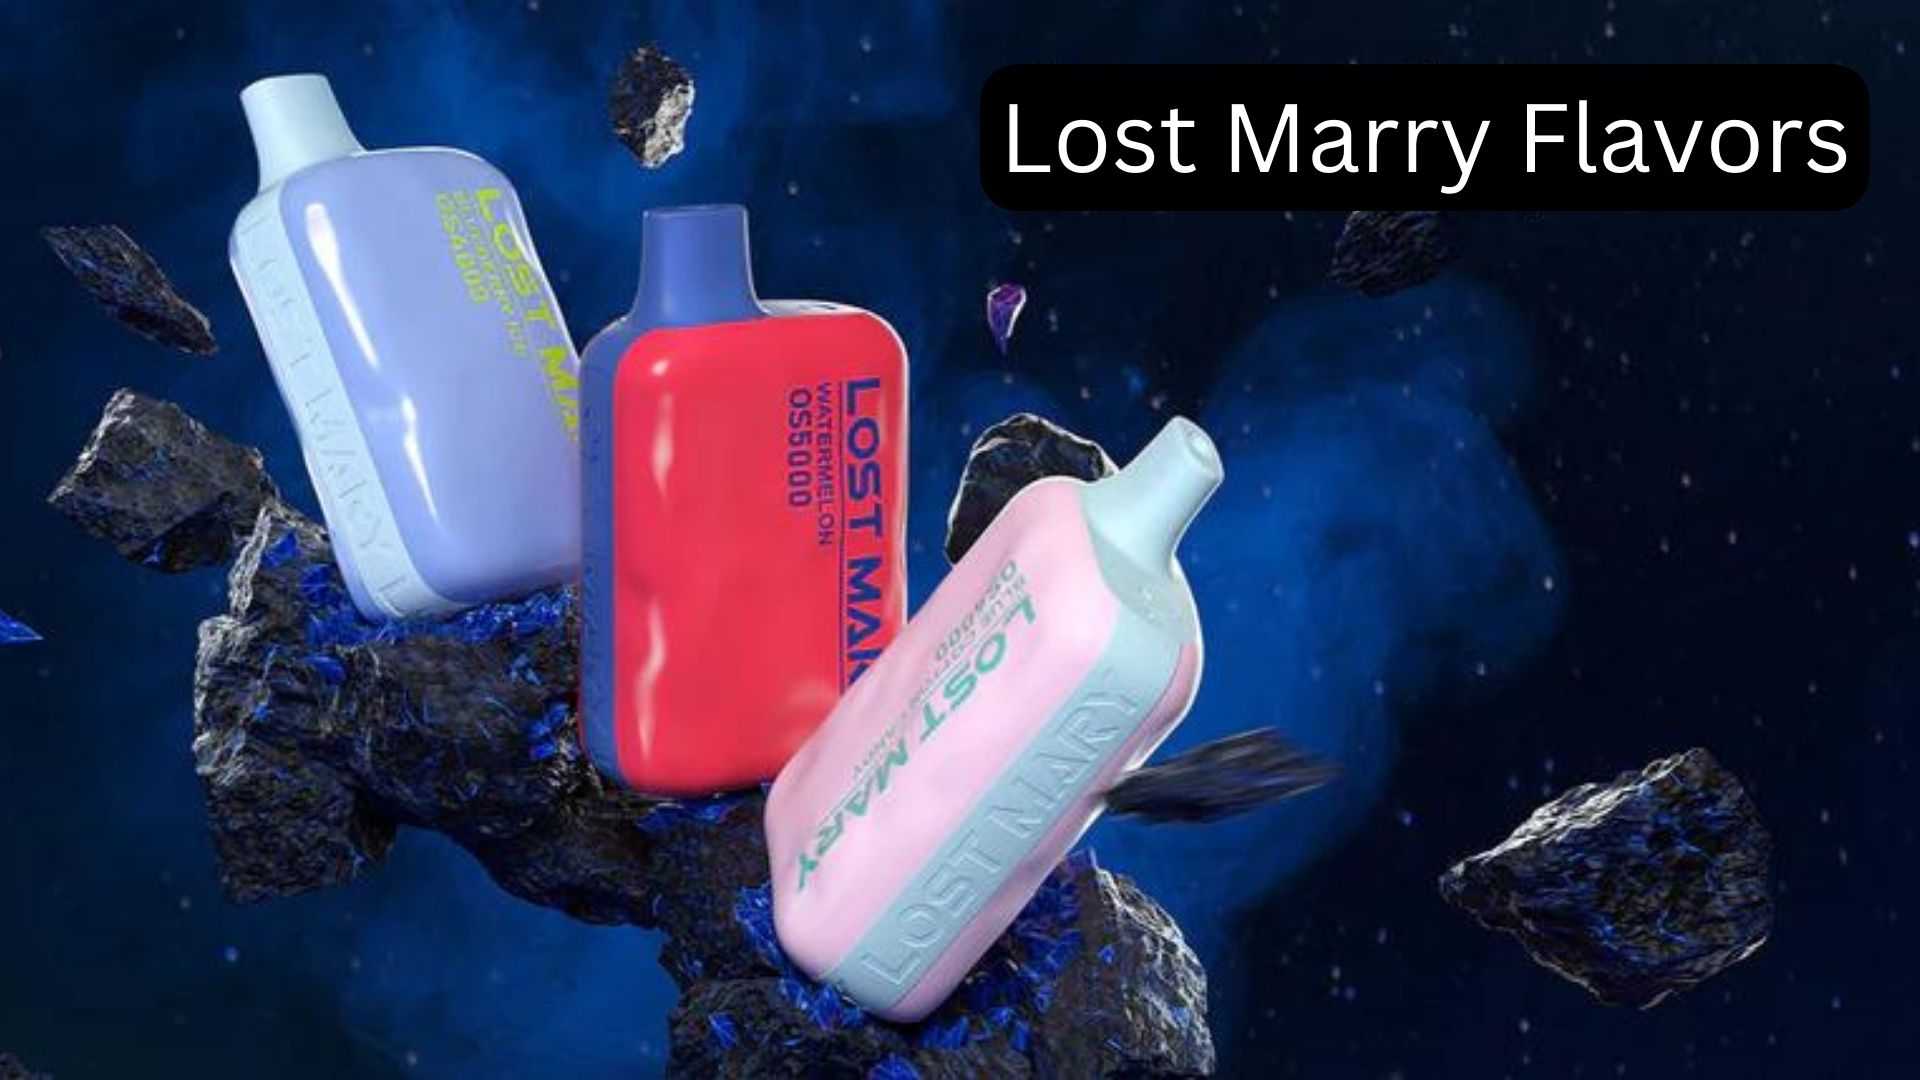 Lost Marry Flavors